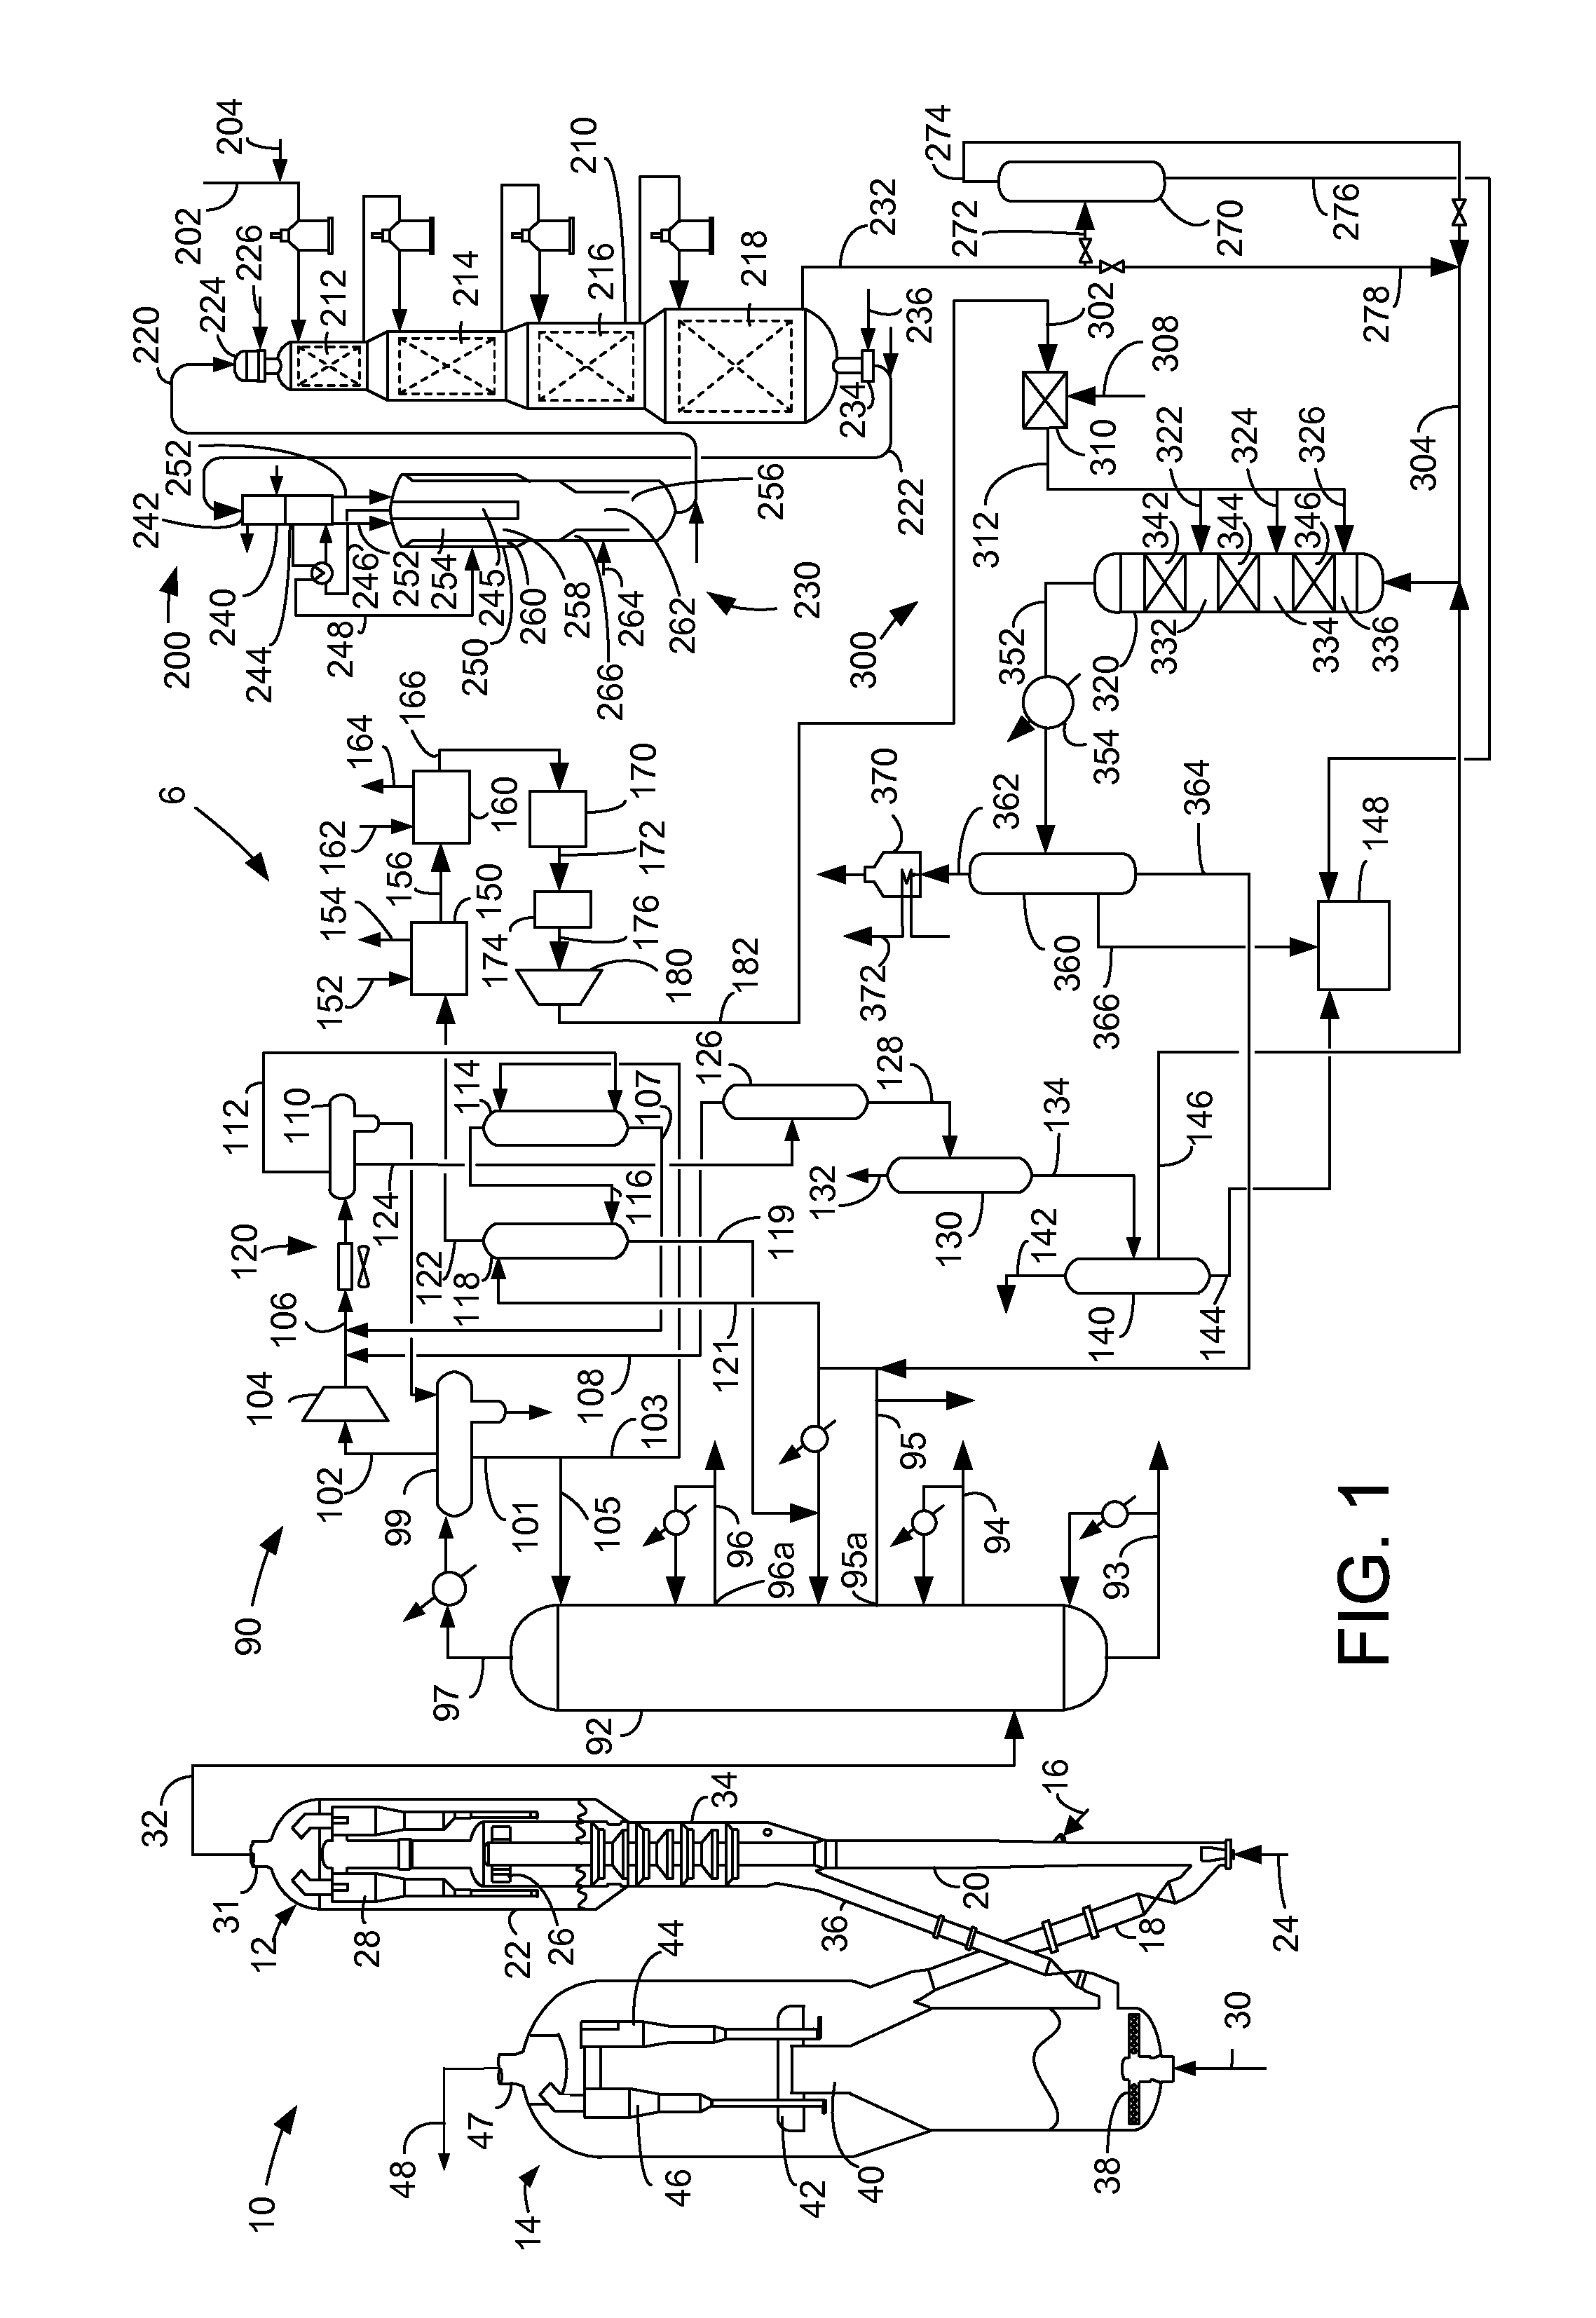 Apparatus for the reduction of gasoline benzene content by alkylation with dilute ethylene